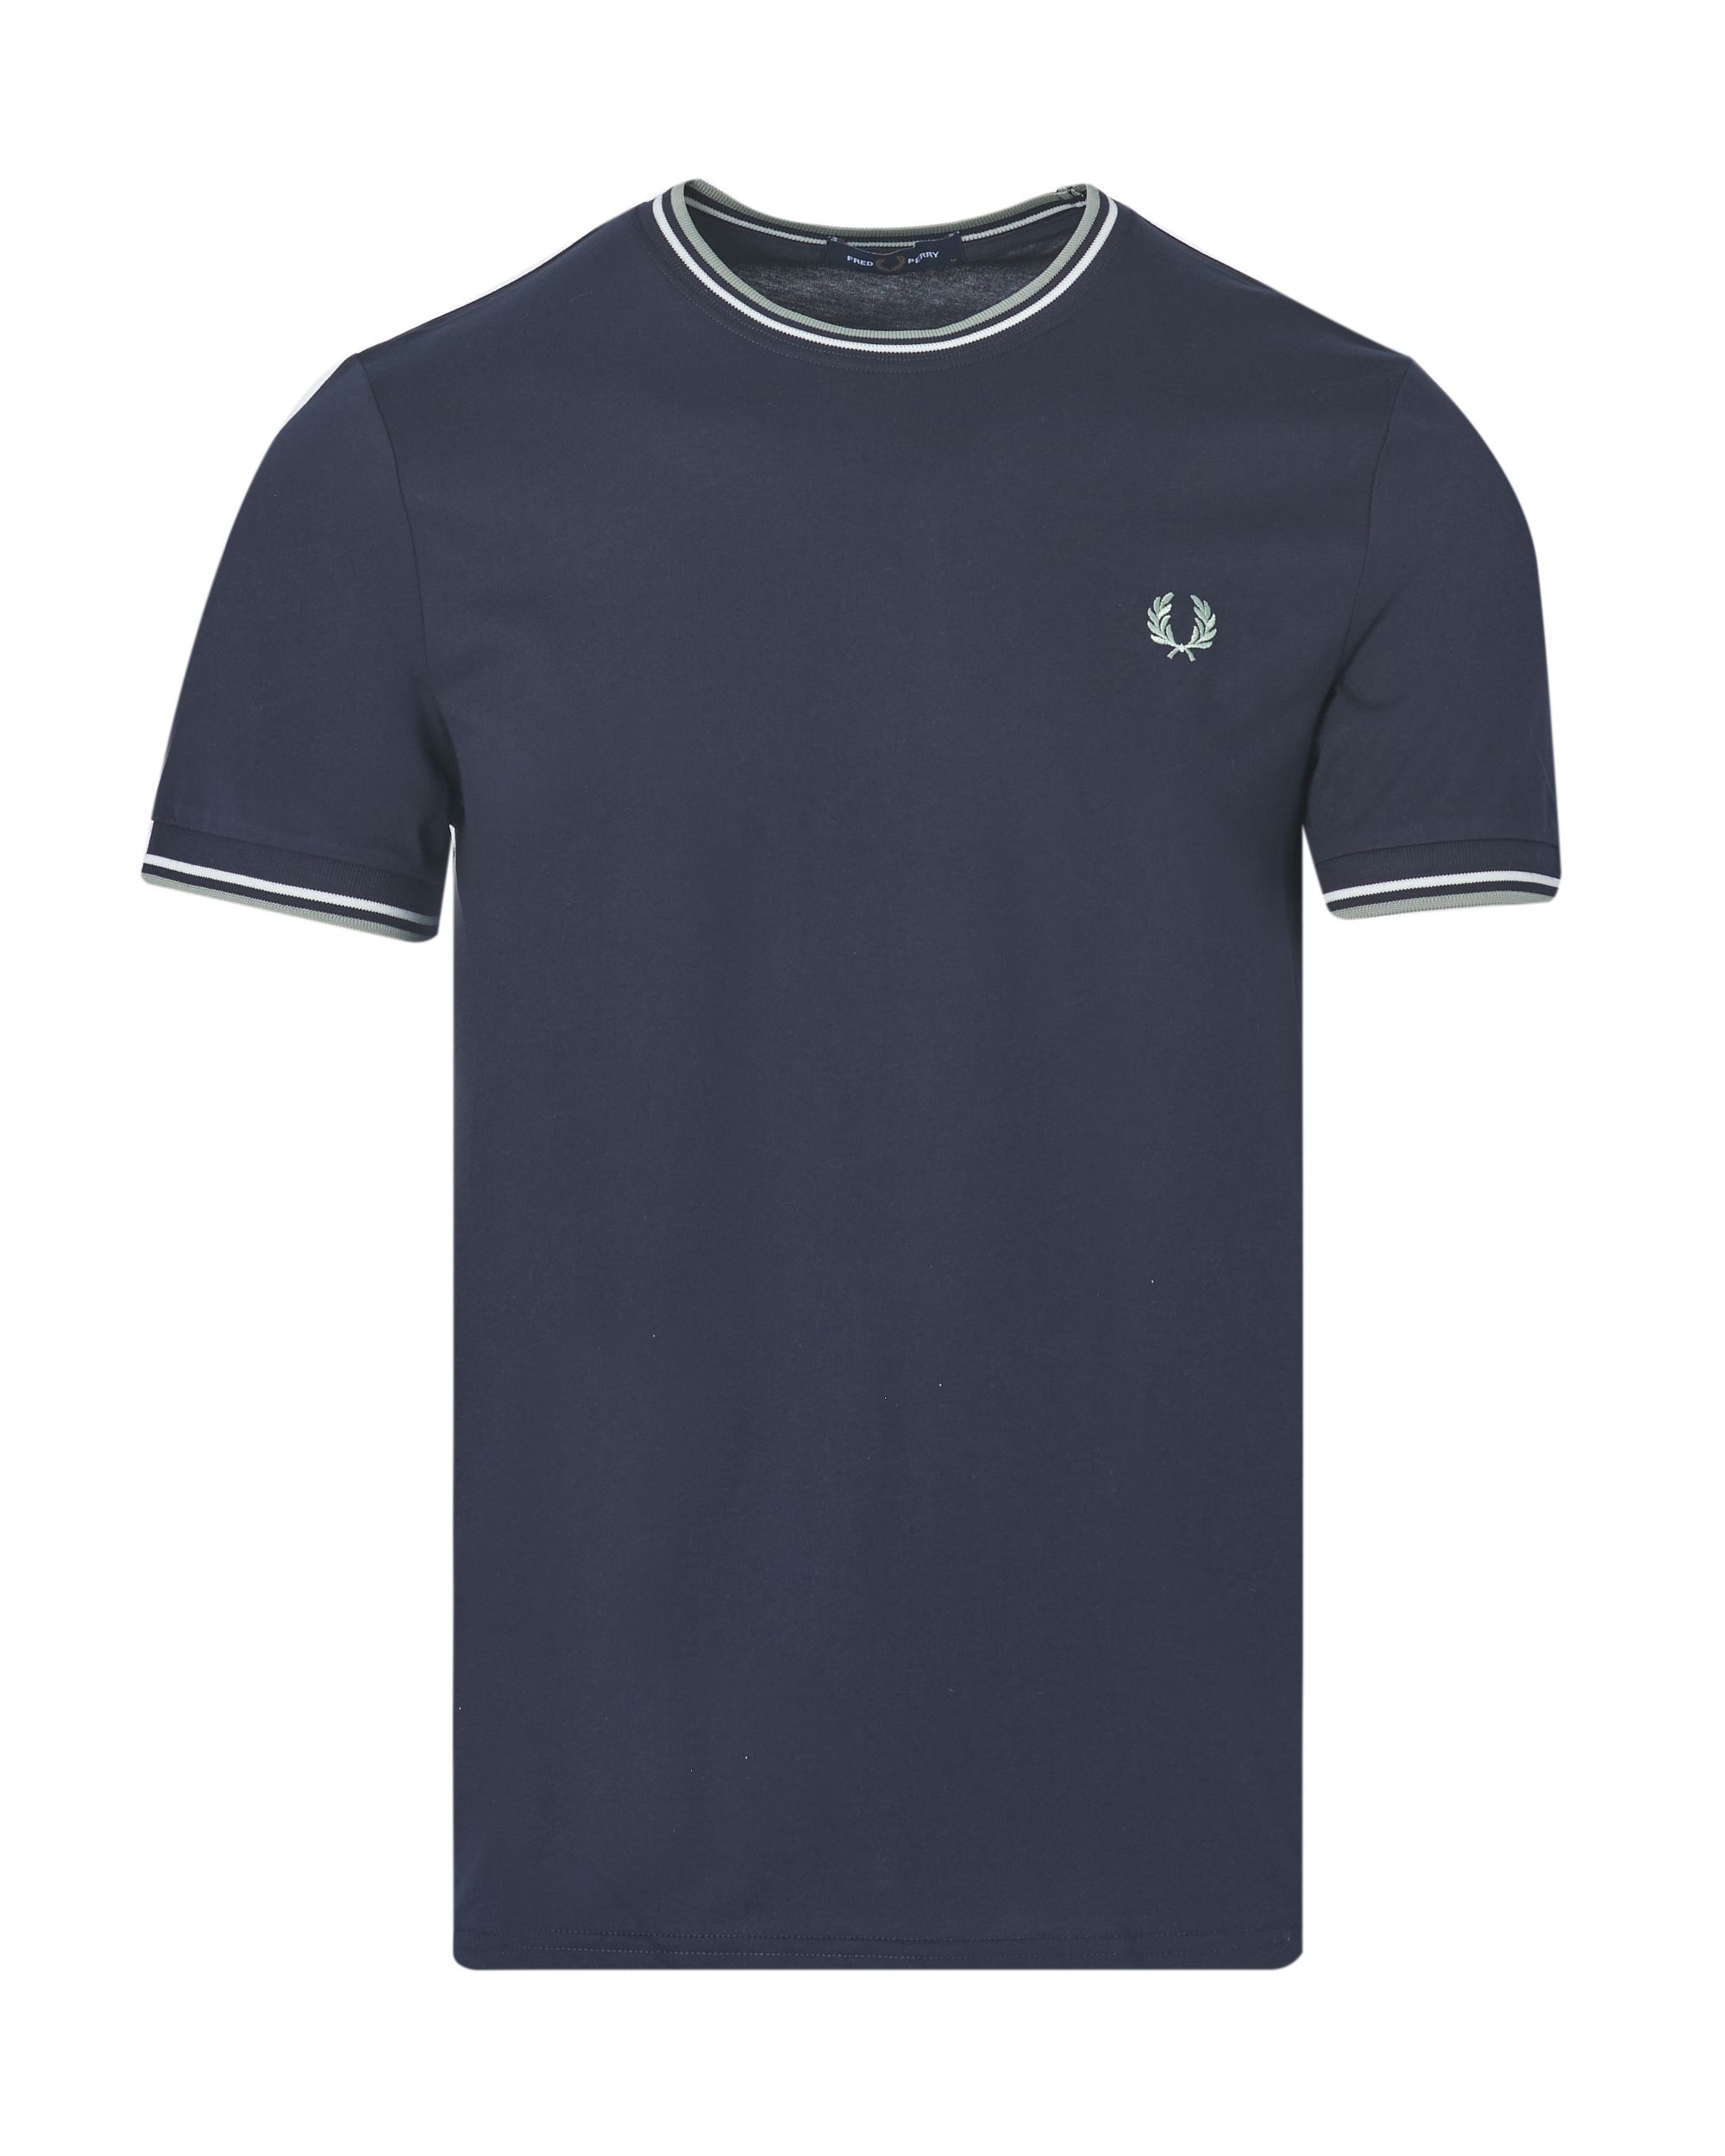 Fred Perry T-shirt KM Blauw 083514-001-L